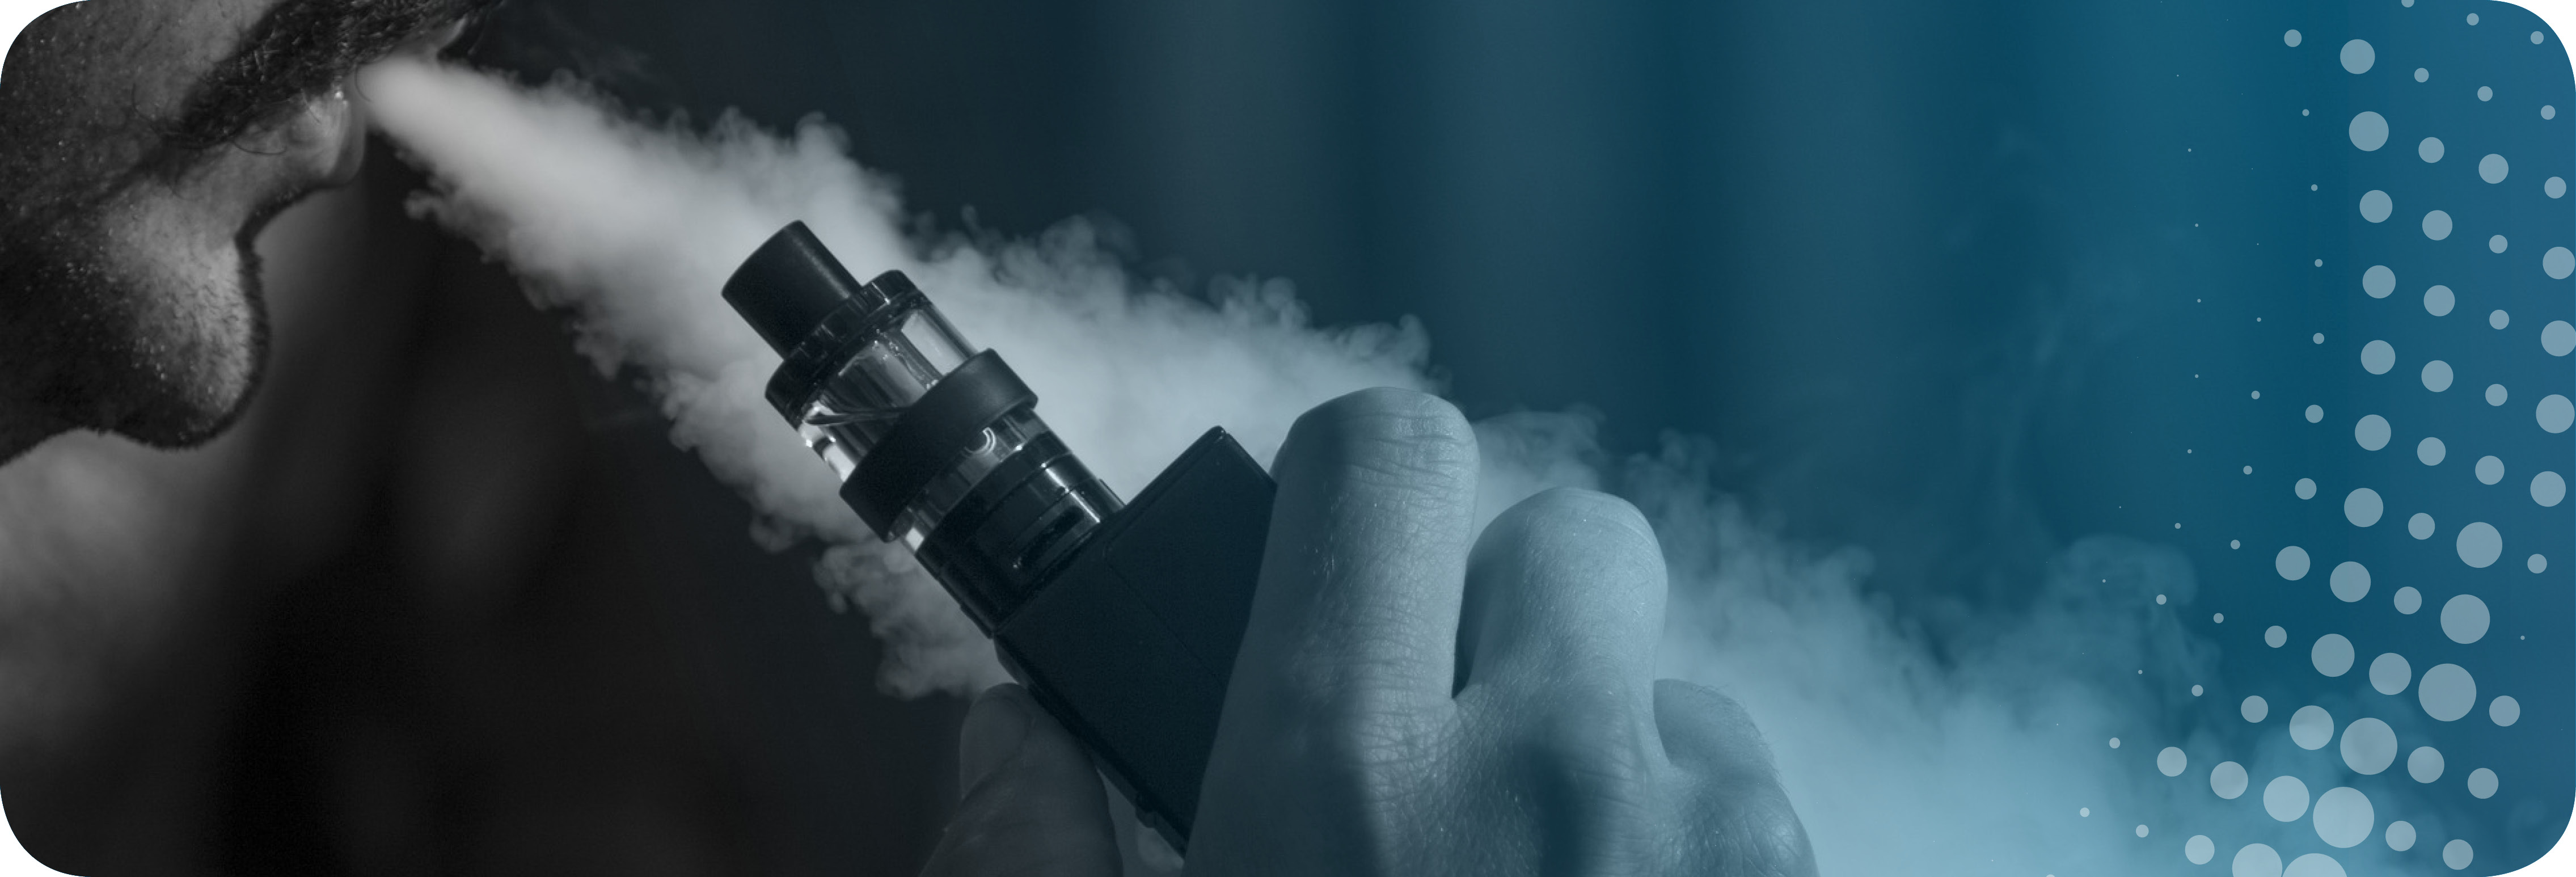 vaping-suspected-long-term-consequences-health-risks-and-death.-man-vaping.-need-for-regulation